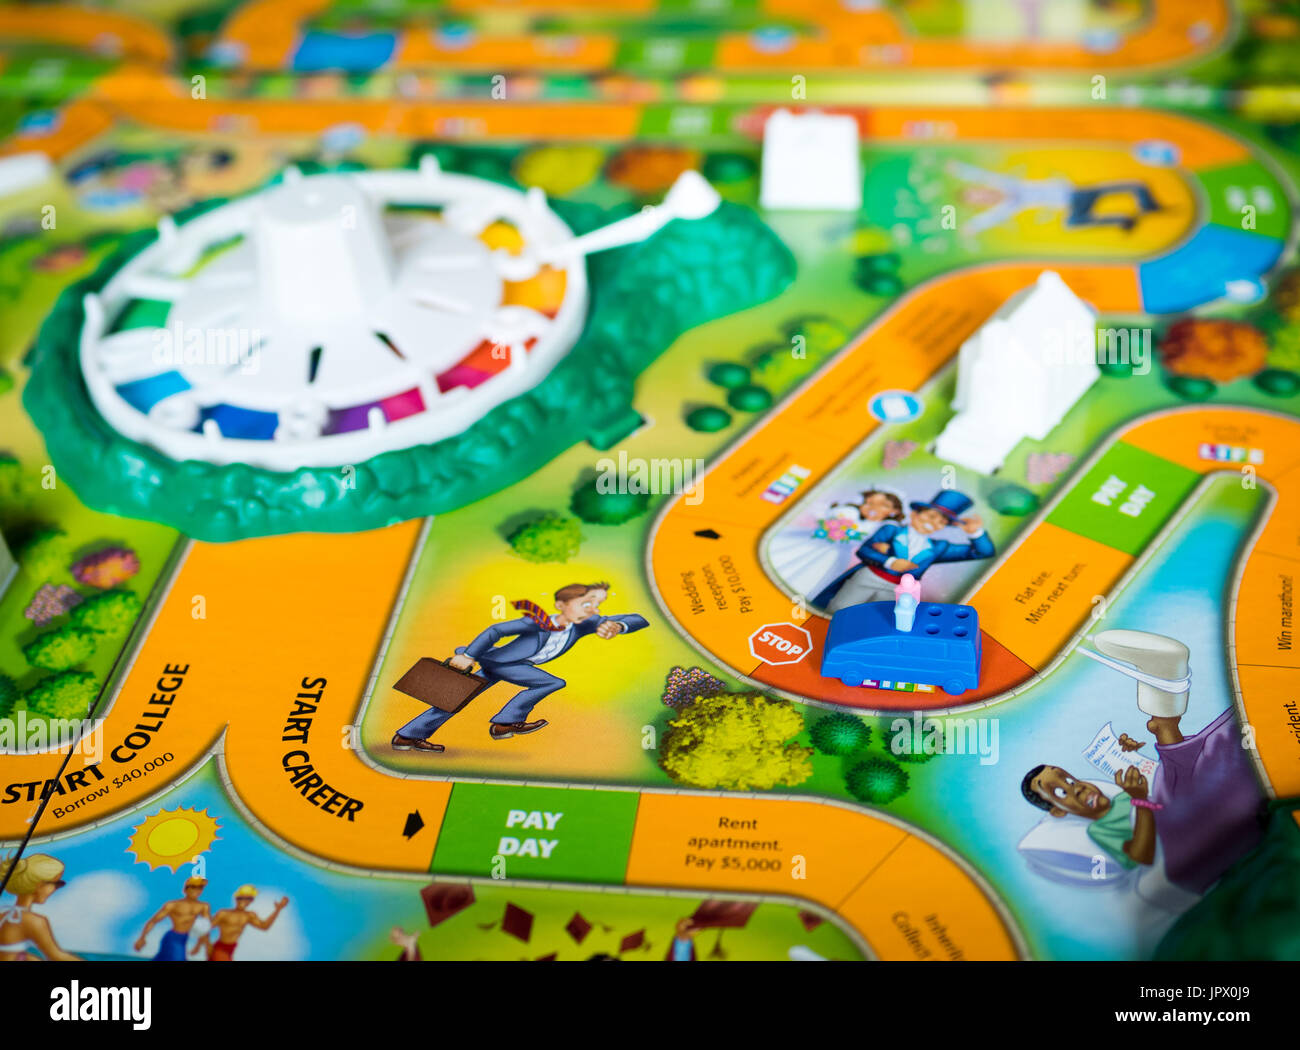 A view of The Game of Life (also known as LIFE), a board game originally created in 1860 by MIlton Bradley. Stock Photo